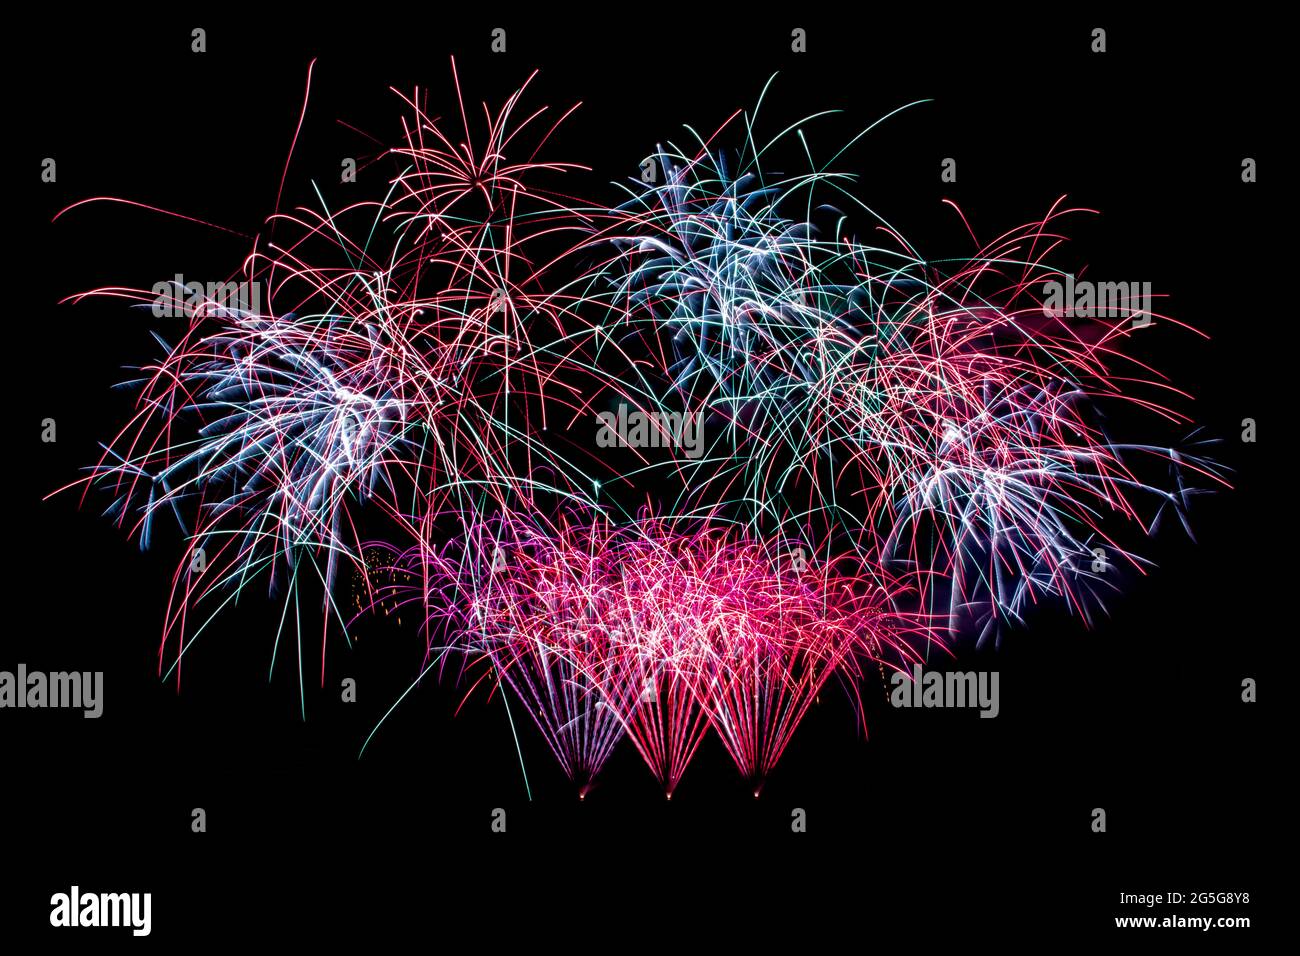 Colorful fireworks isolated on a black background Stock Photo